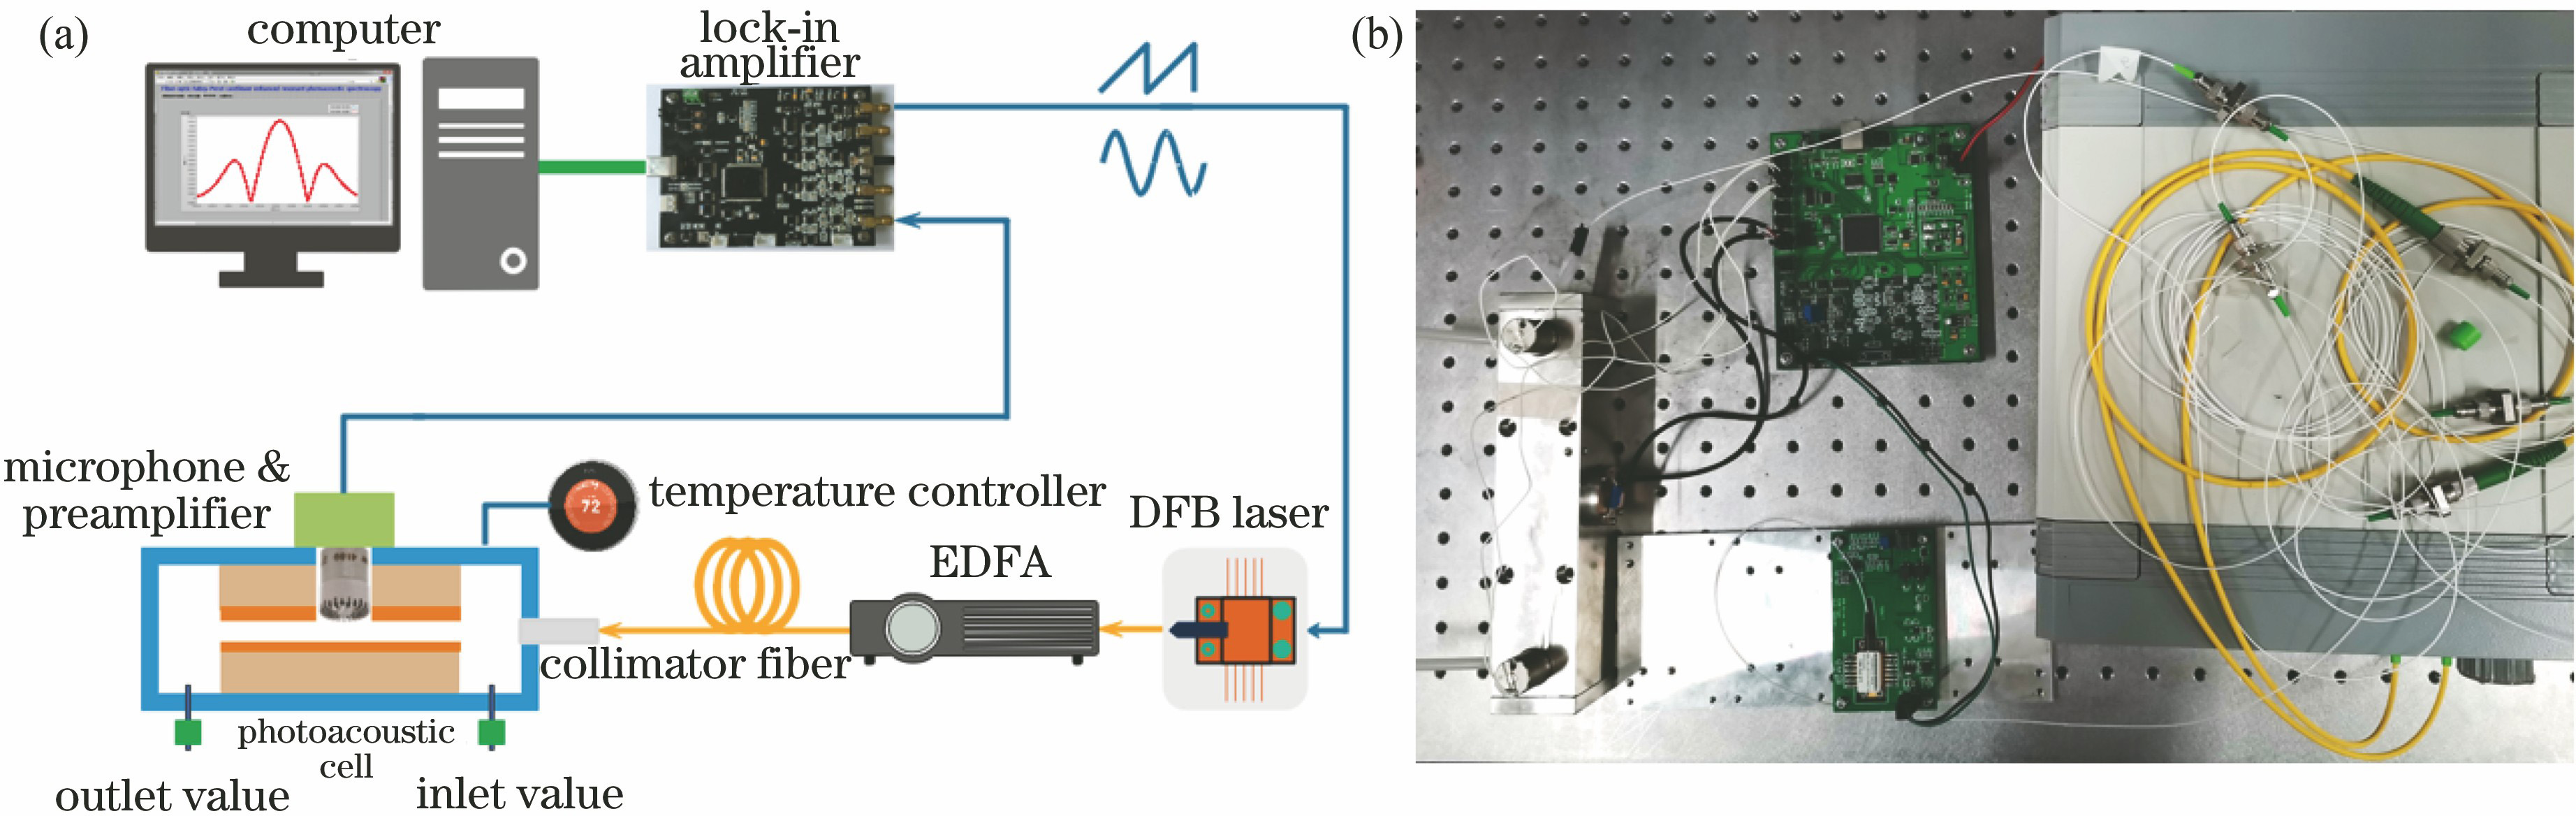 Structure diagram and photo of the fiber amplification enhanced photoacoustic spectroscopy based gas detection system. (a) Structure diagram; (b) photo